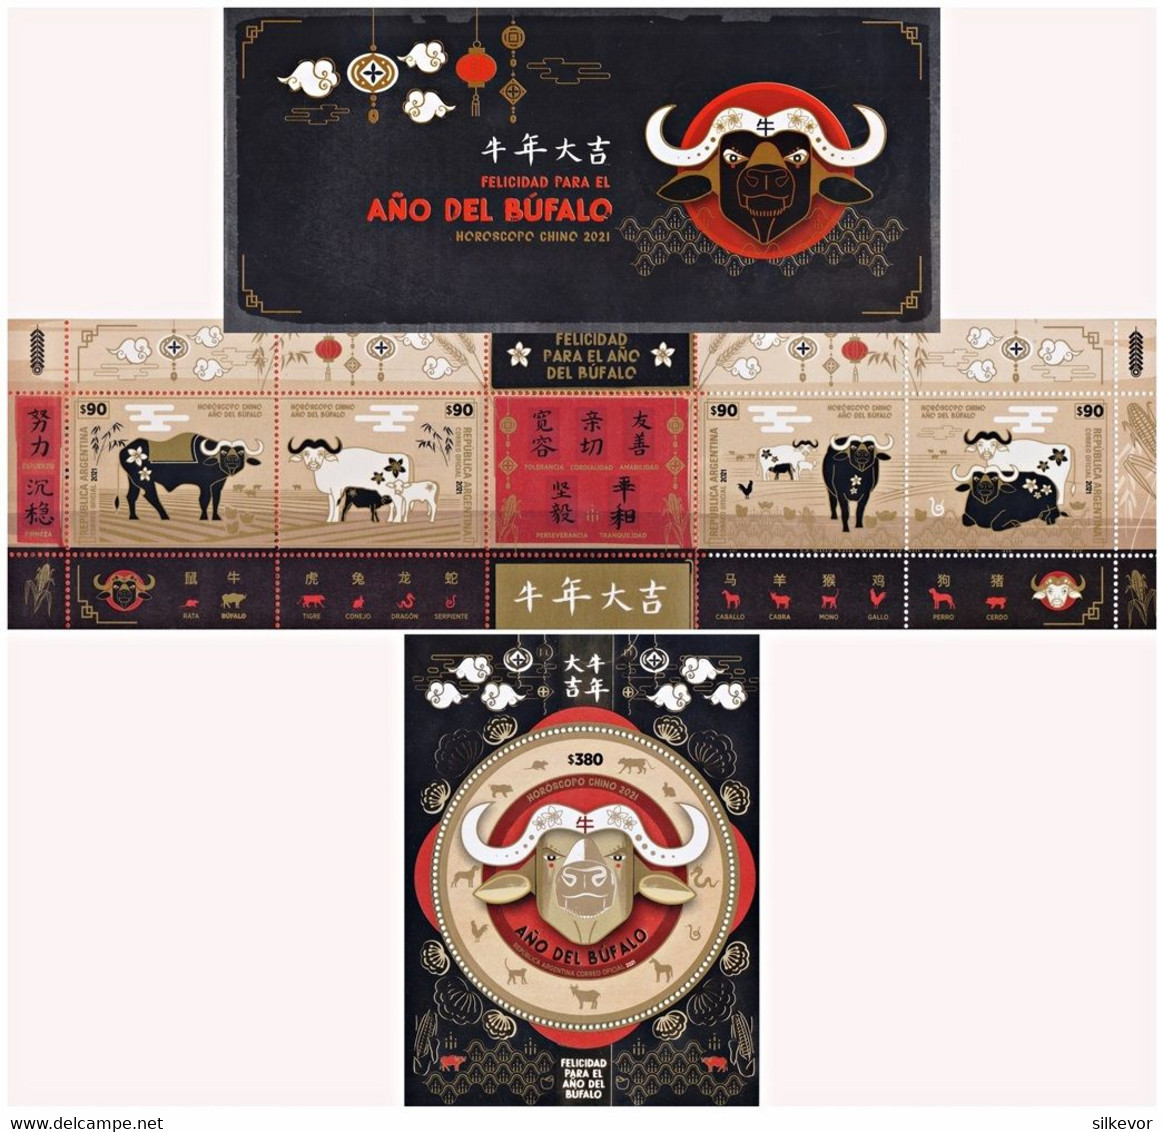 ARGENTINA-2021-STAMPS-YEAR OF THE BUFALO-CHINESE HOROSCOPE- BOOKLET + SOUVENIR SHEET-MNH- SEE IMAGE!! - Unused Stamps